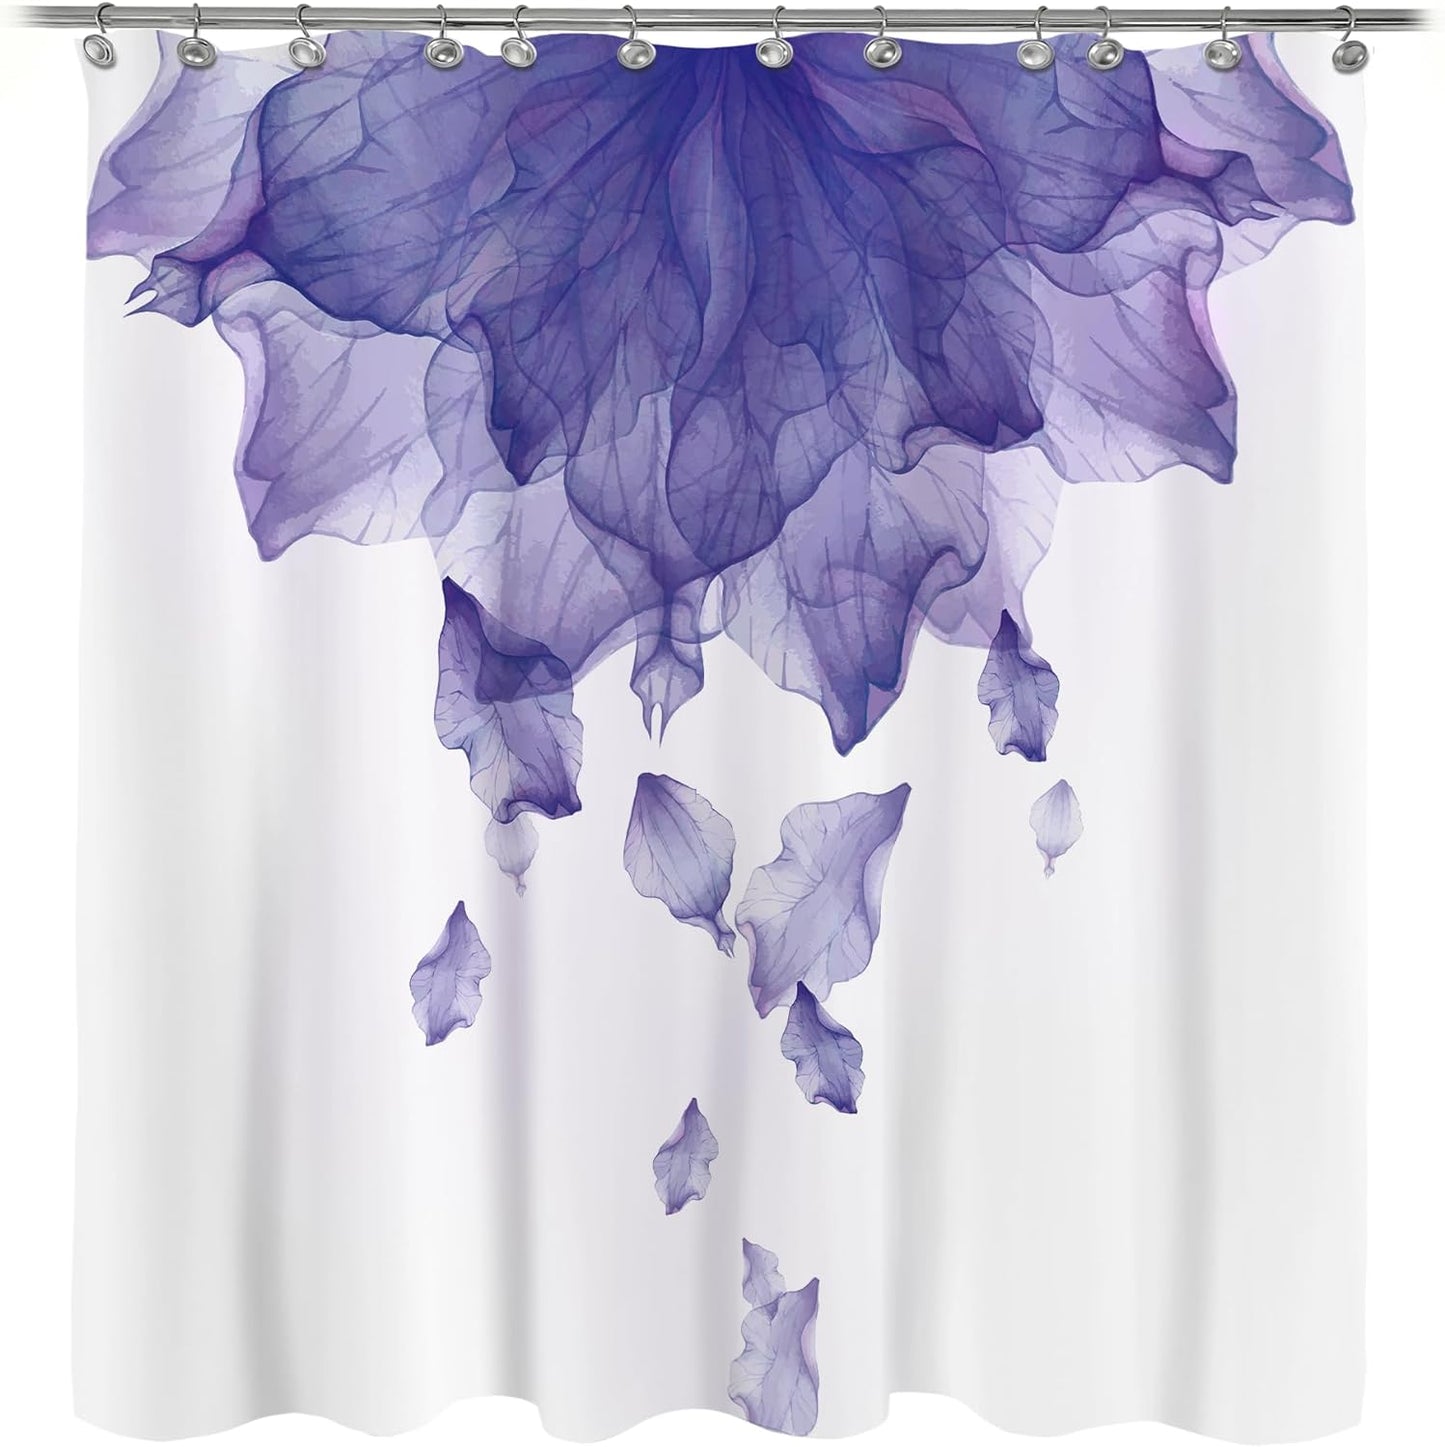 Floral Fabric Shower Curtain, Teal Blue Watercolor Shower Curtain for Bathroom Modern Decor Tapestry